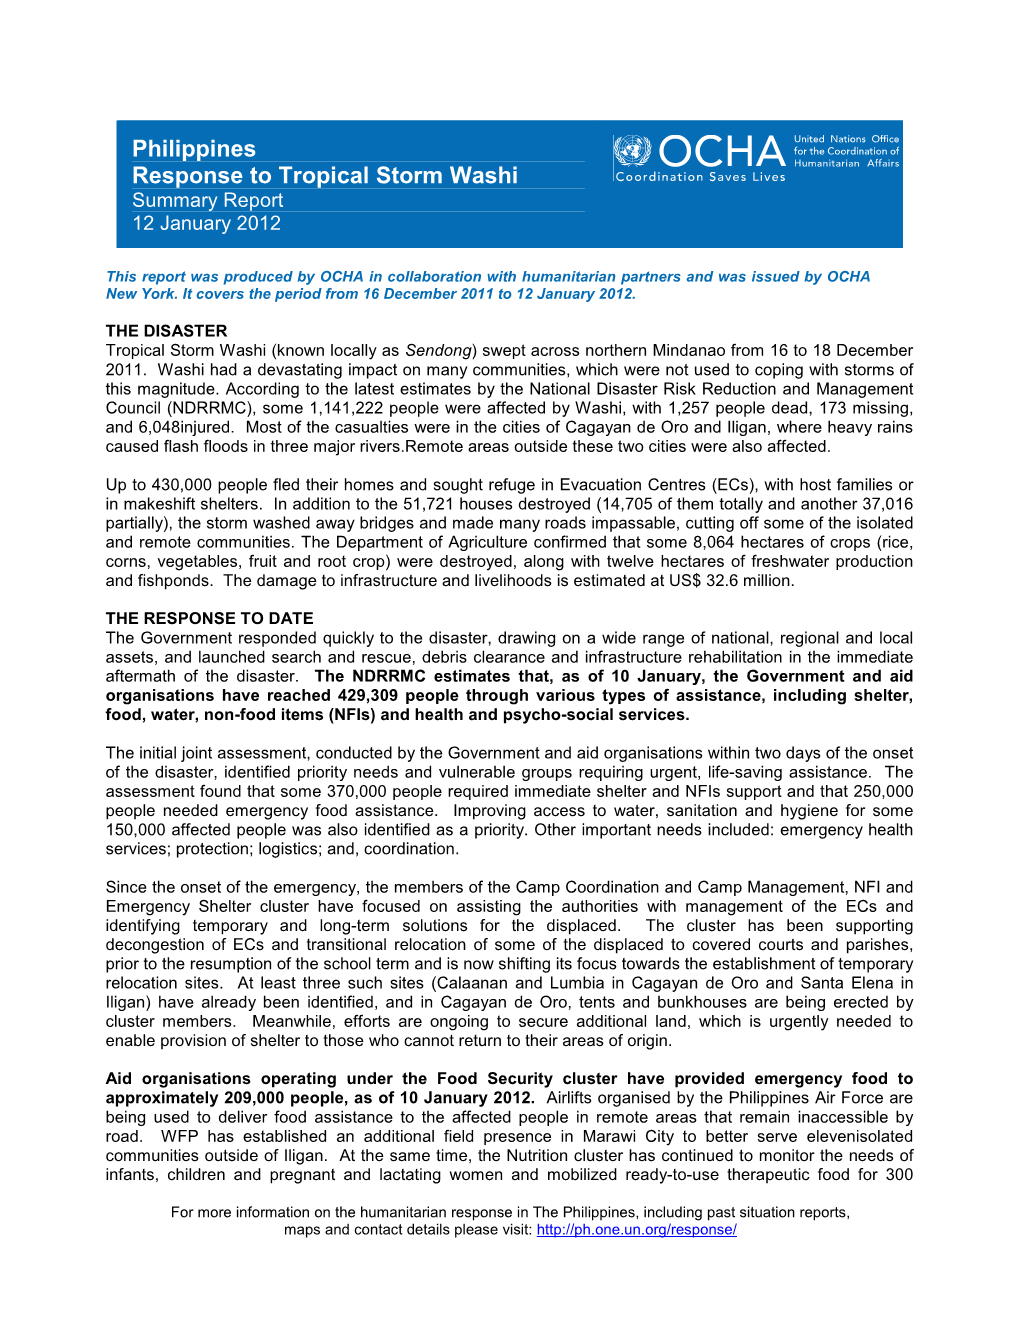 Philippines Response to Tropical Storm Washi Summary Report 12 January 2012